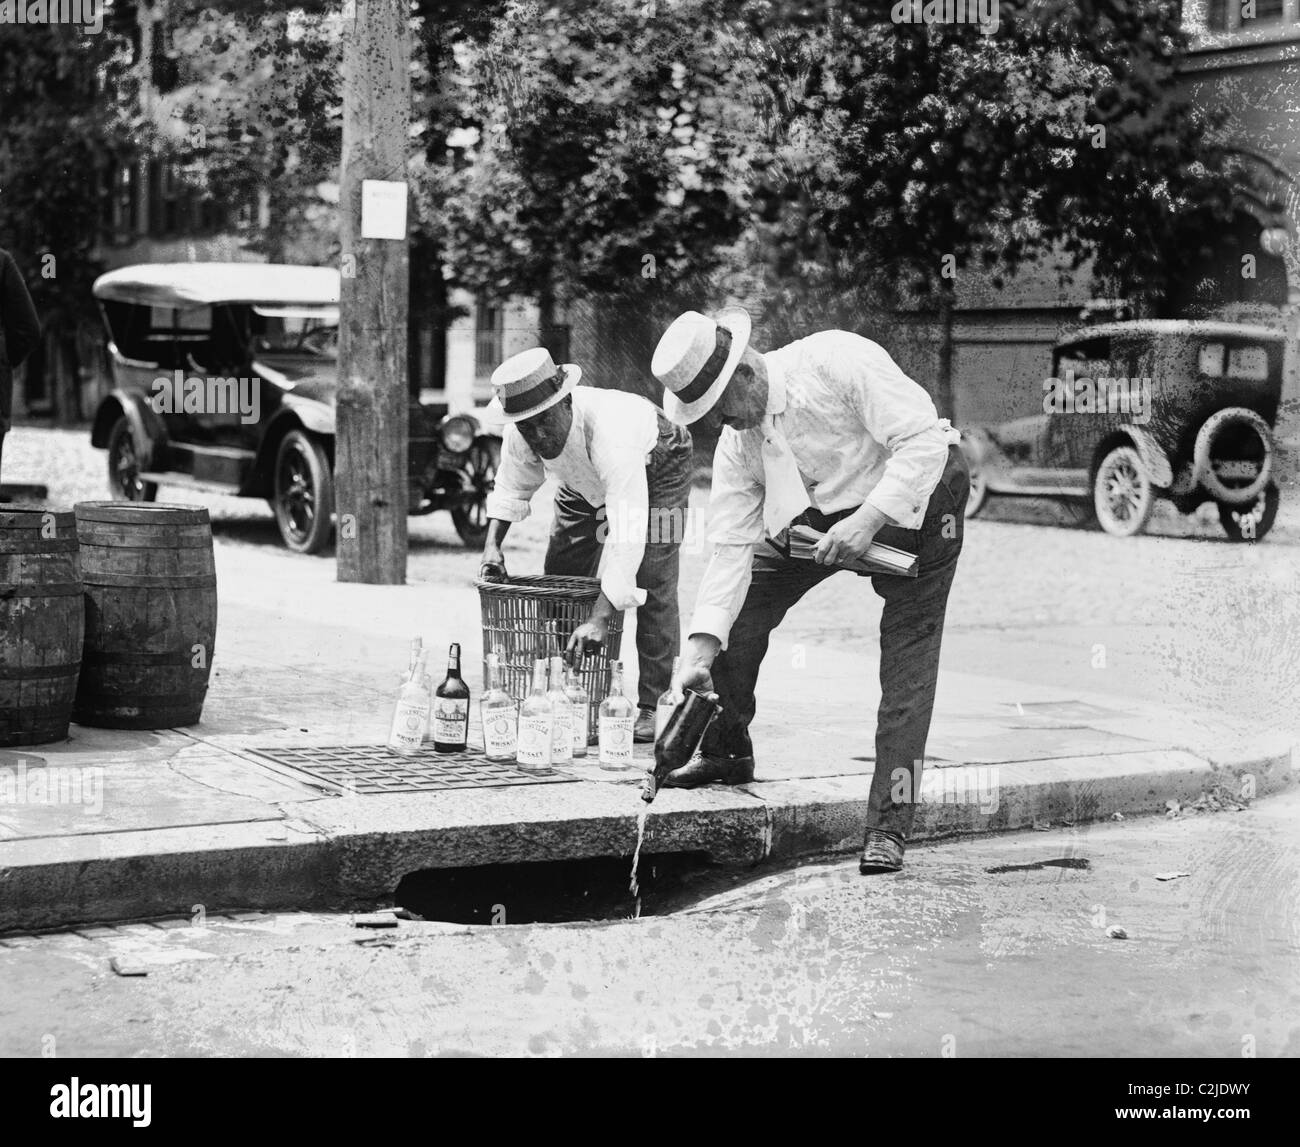 Agents Pouring liquor down a sewer on the Street Stock Photo